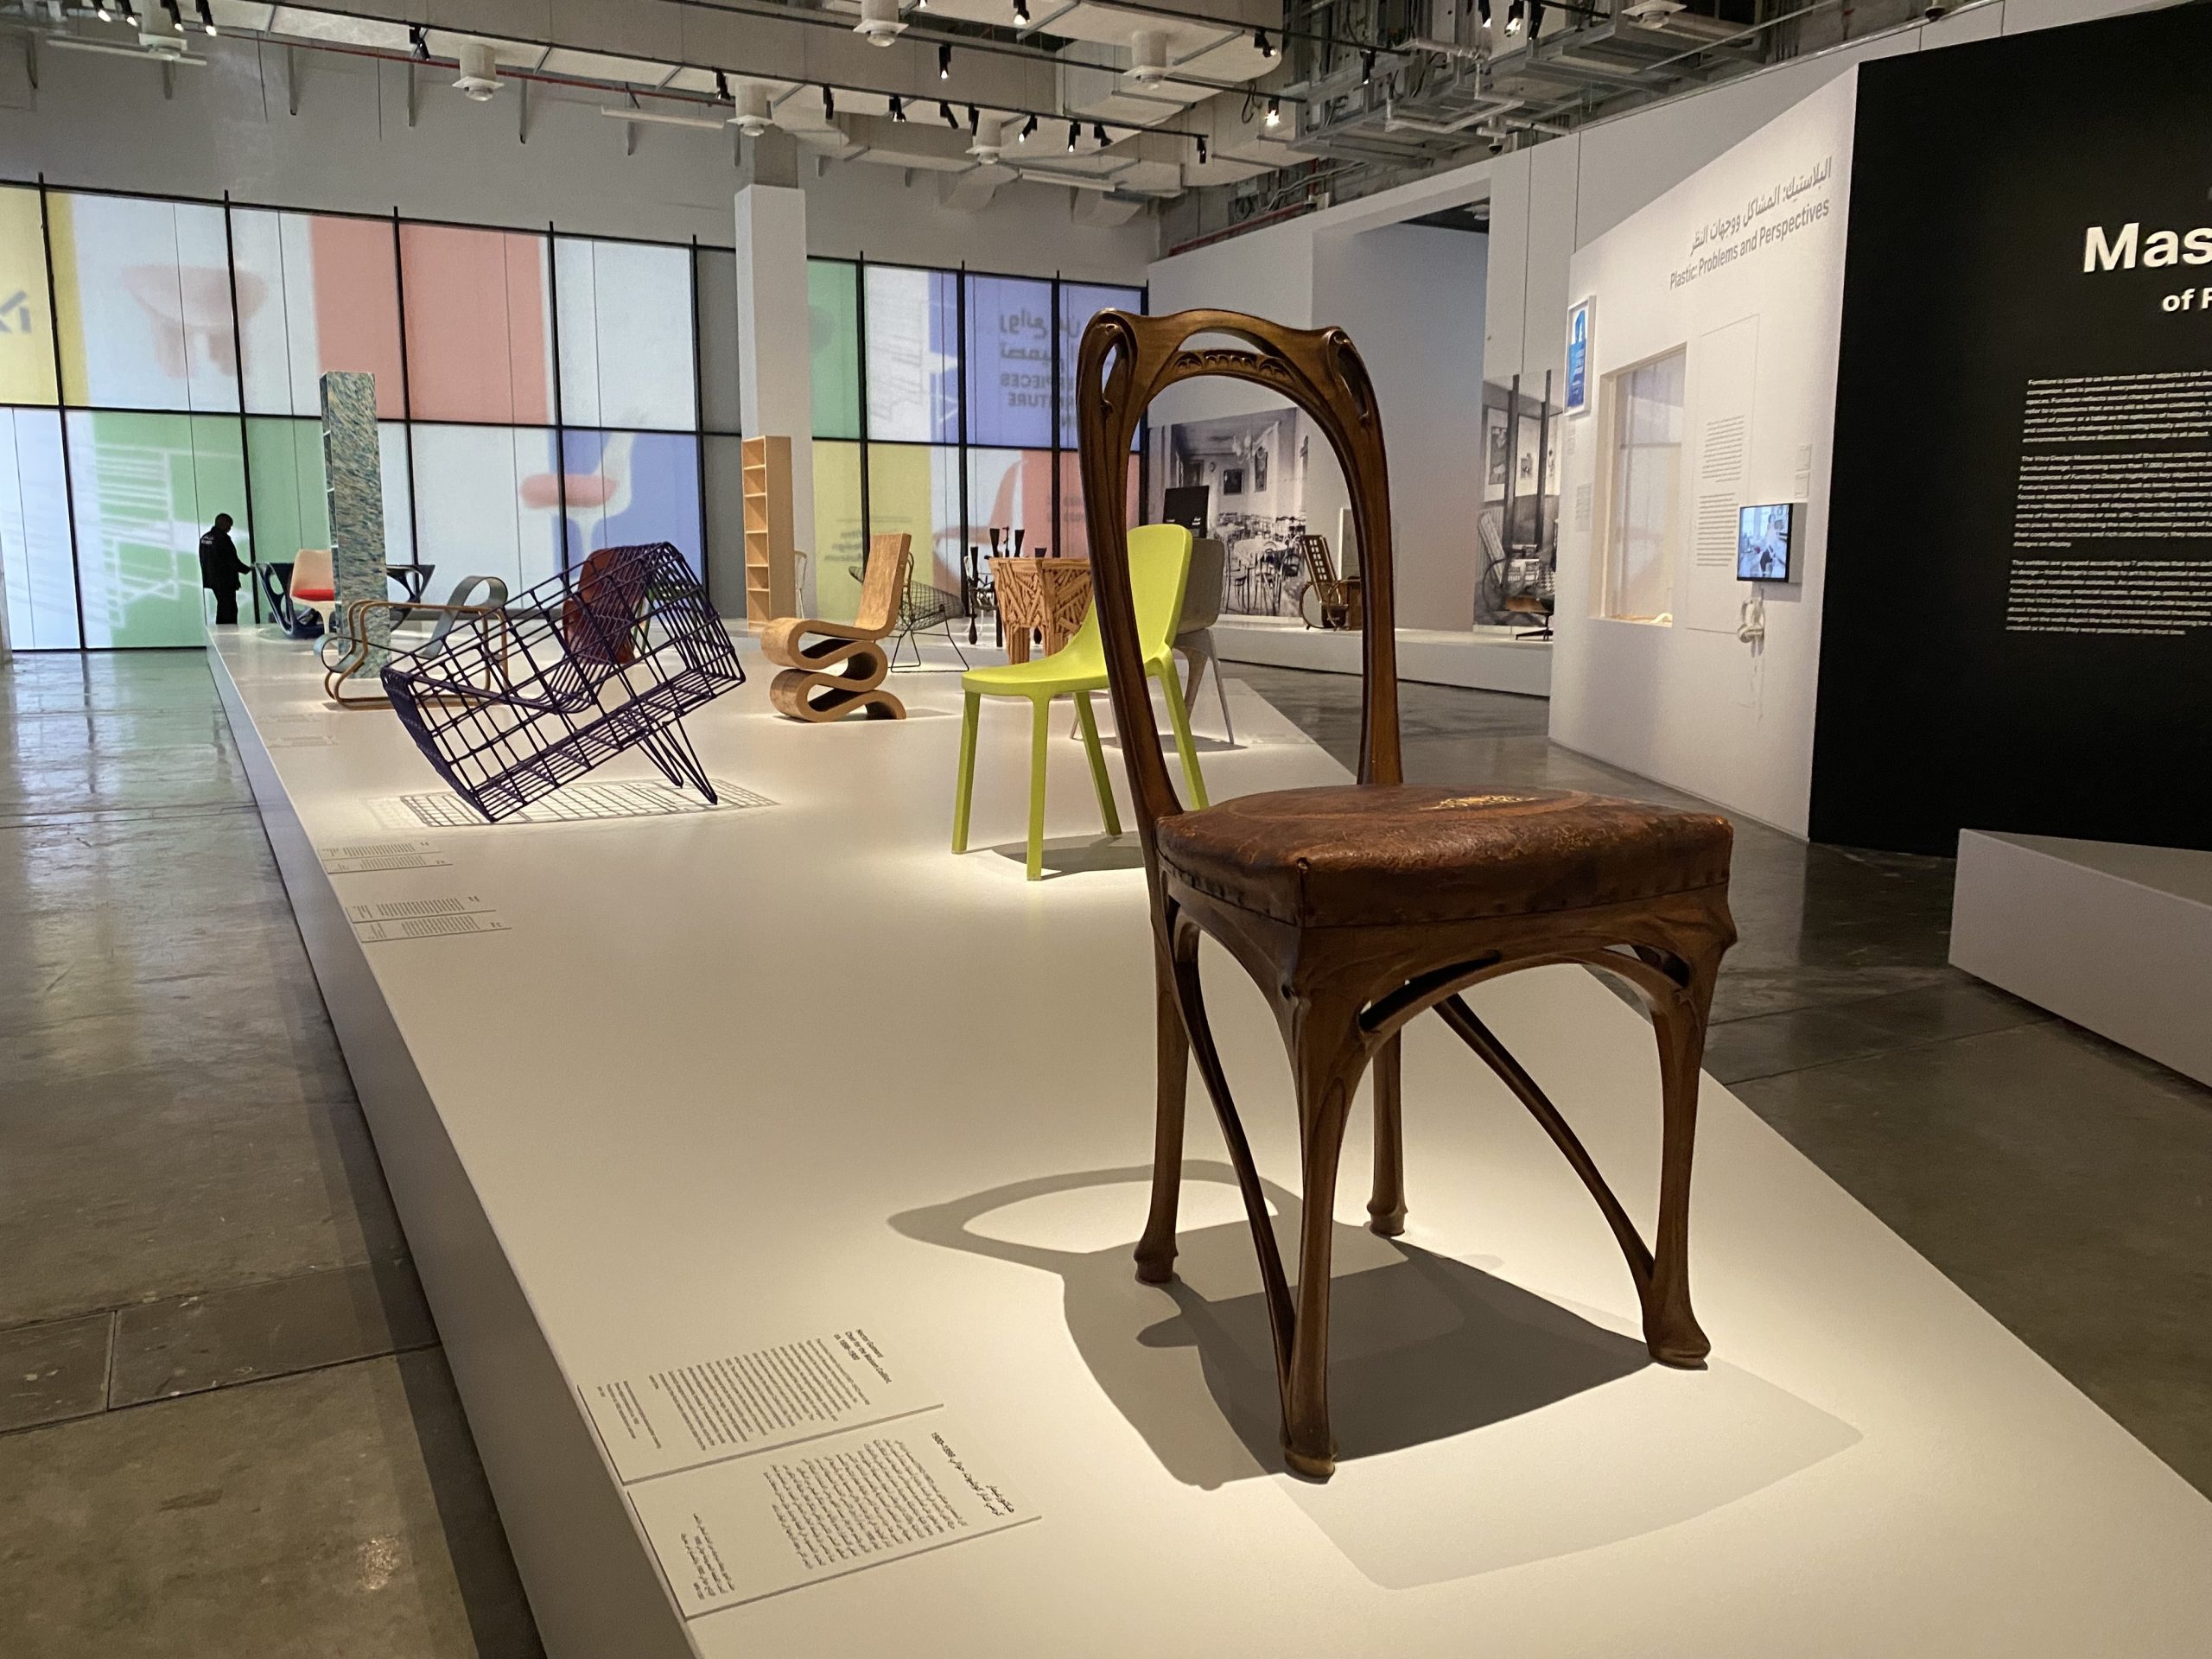 ‘Masterpieces of Furniture Design’ exhibition dives into evolution of design with centuries-old pieces